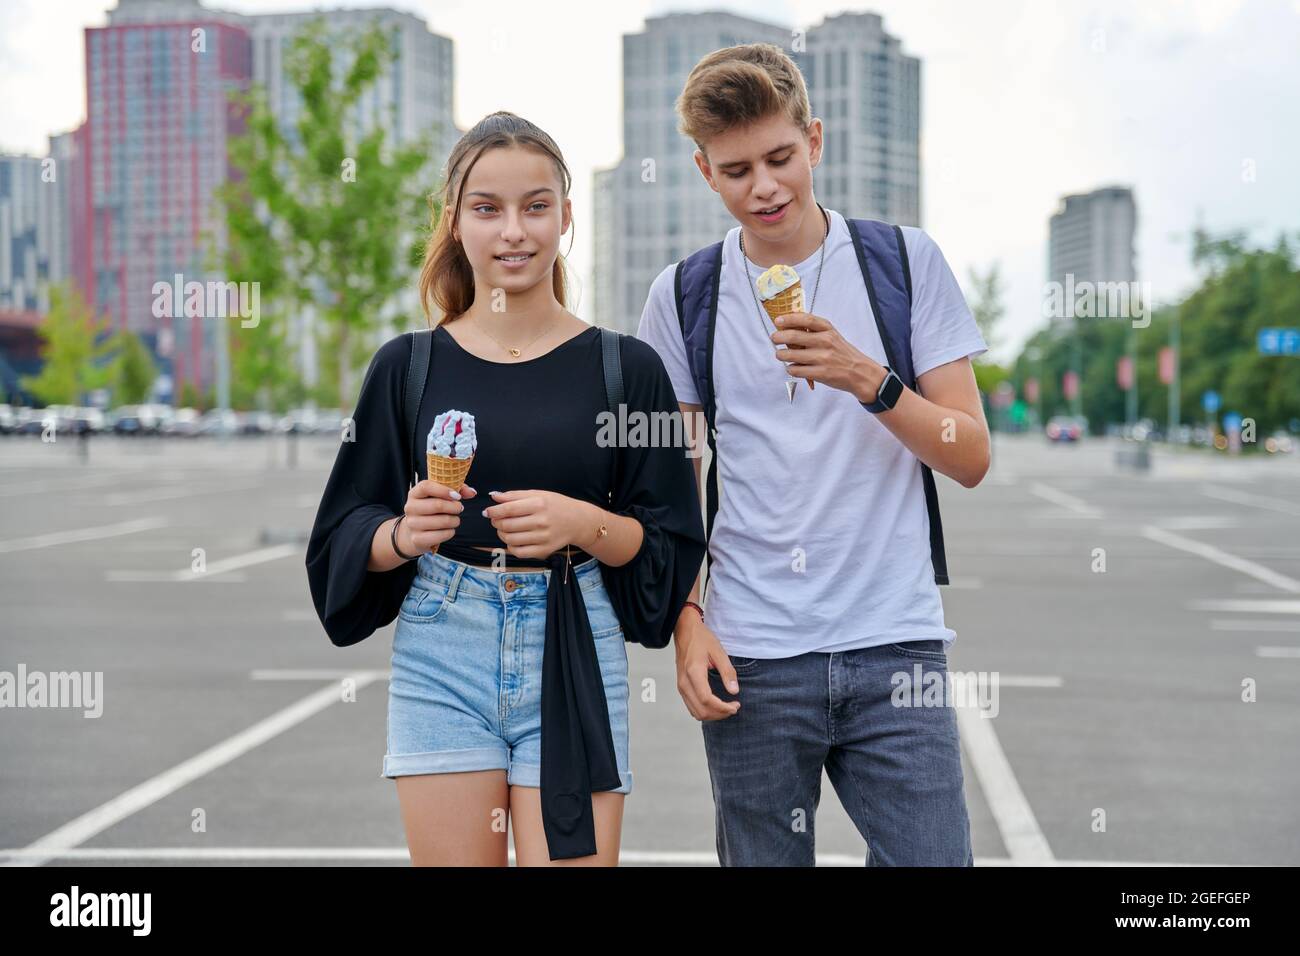 Happy talking couple of teenagers walking together in the city Stock Photo